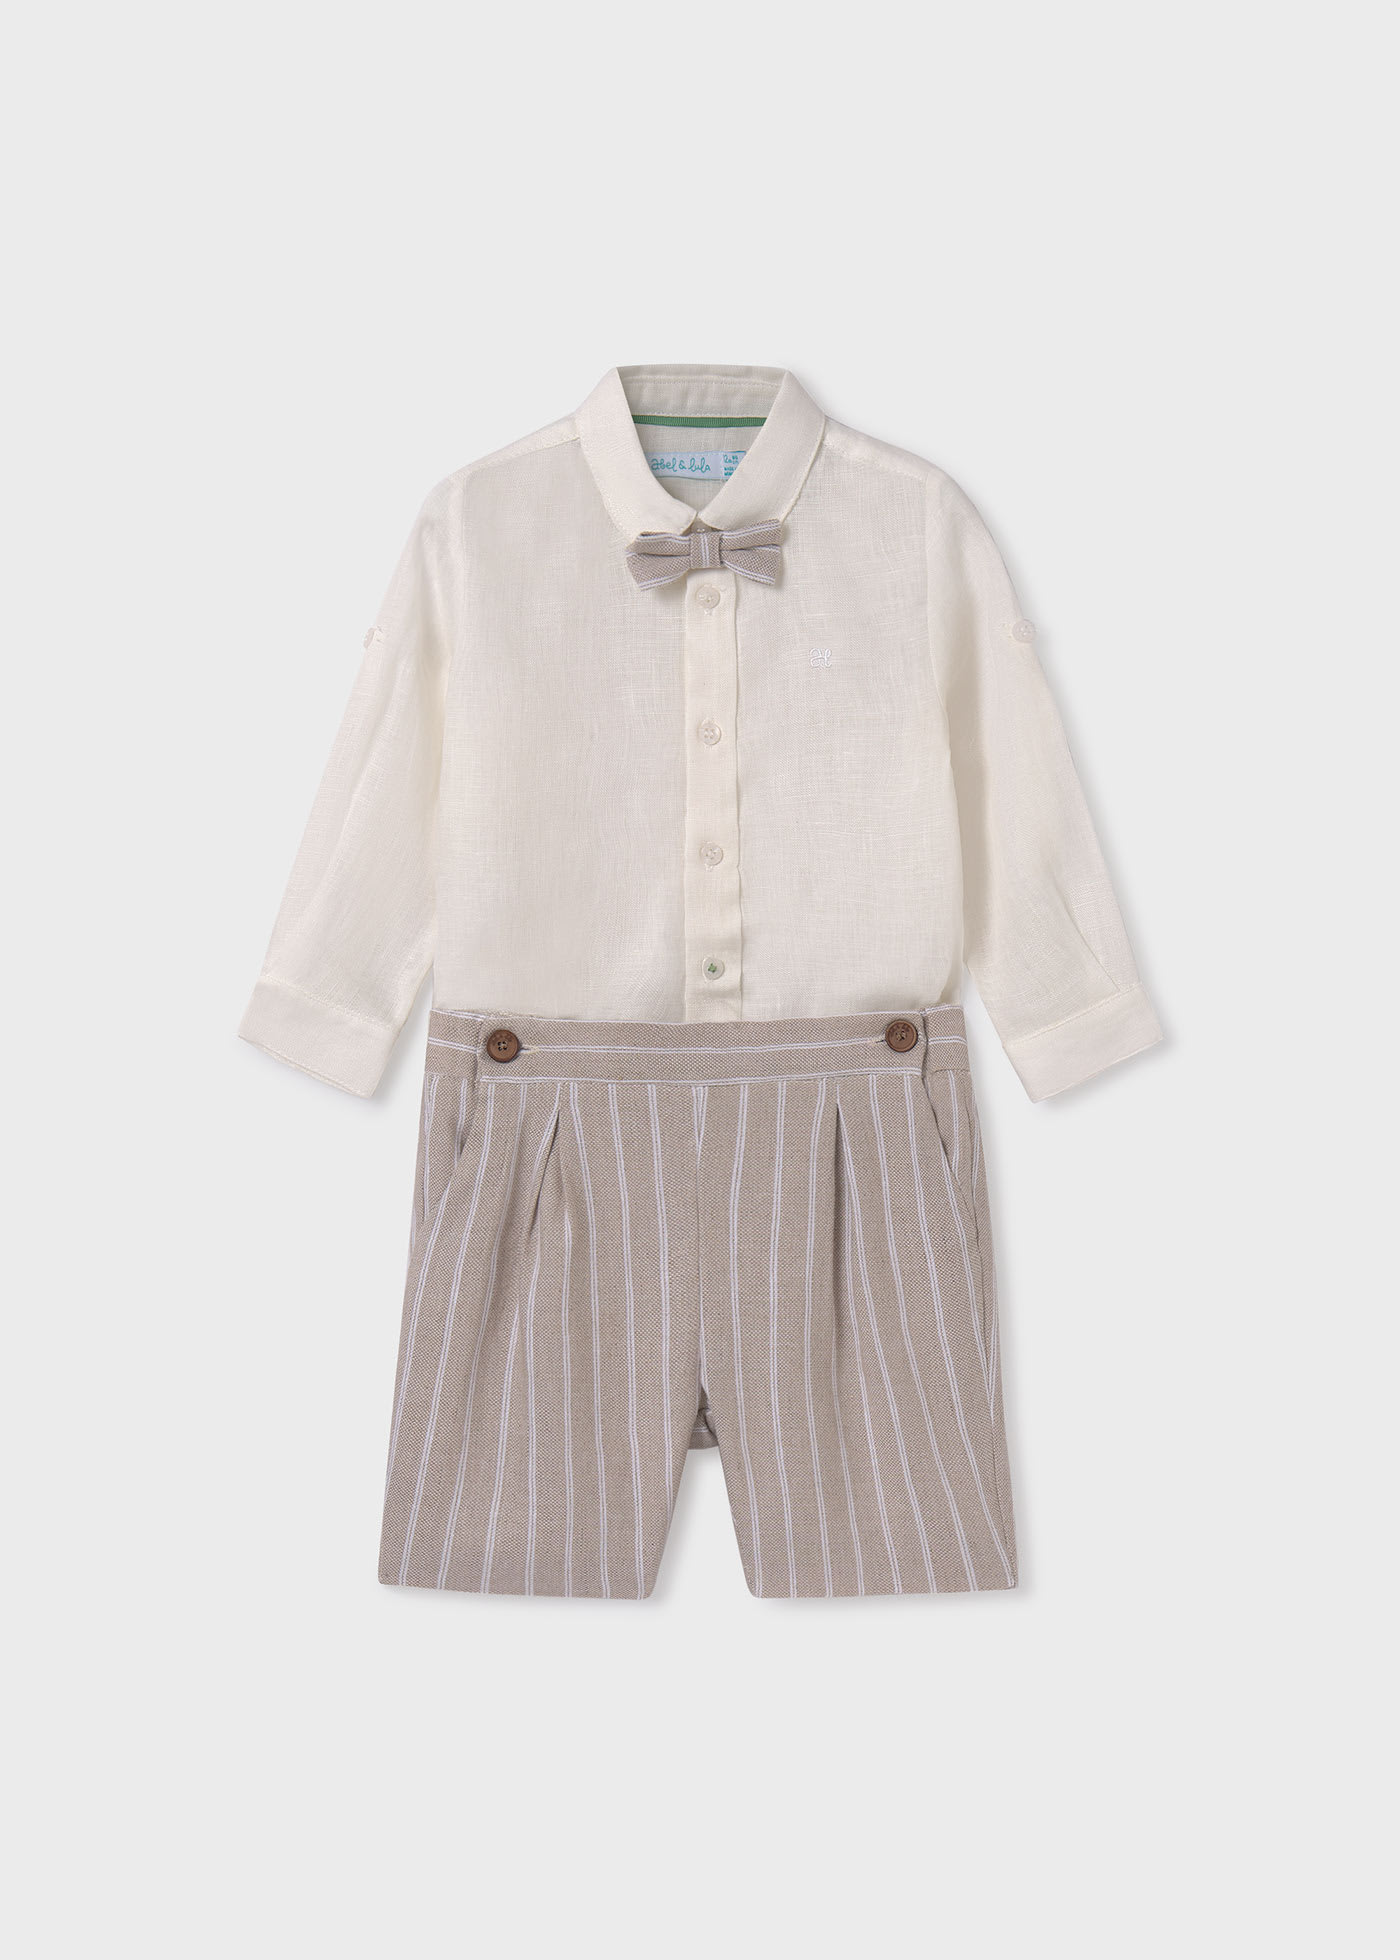 Boy Linen Shirt with Bow Tie and Striped Shorts Set